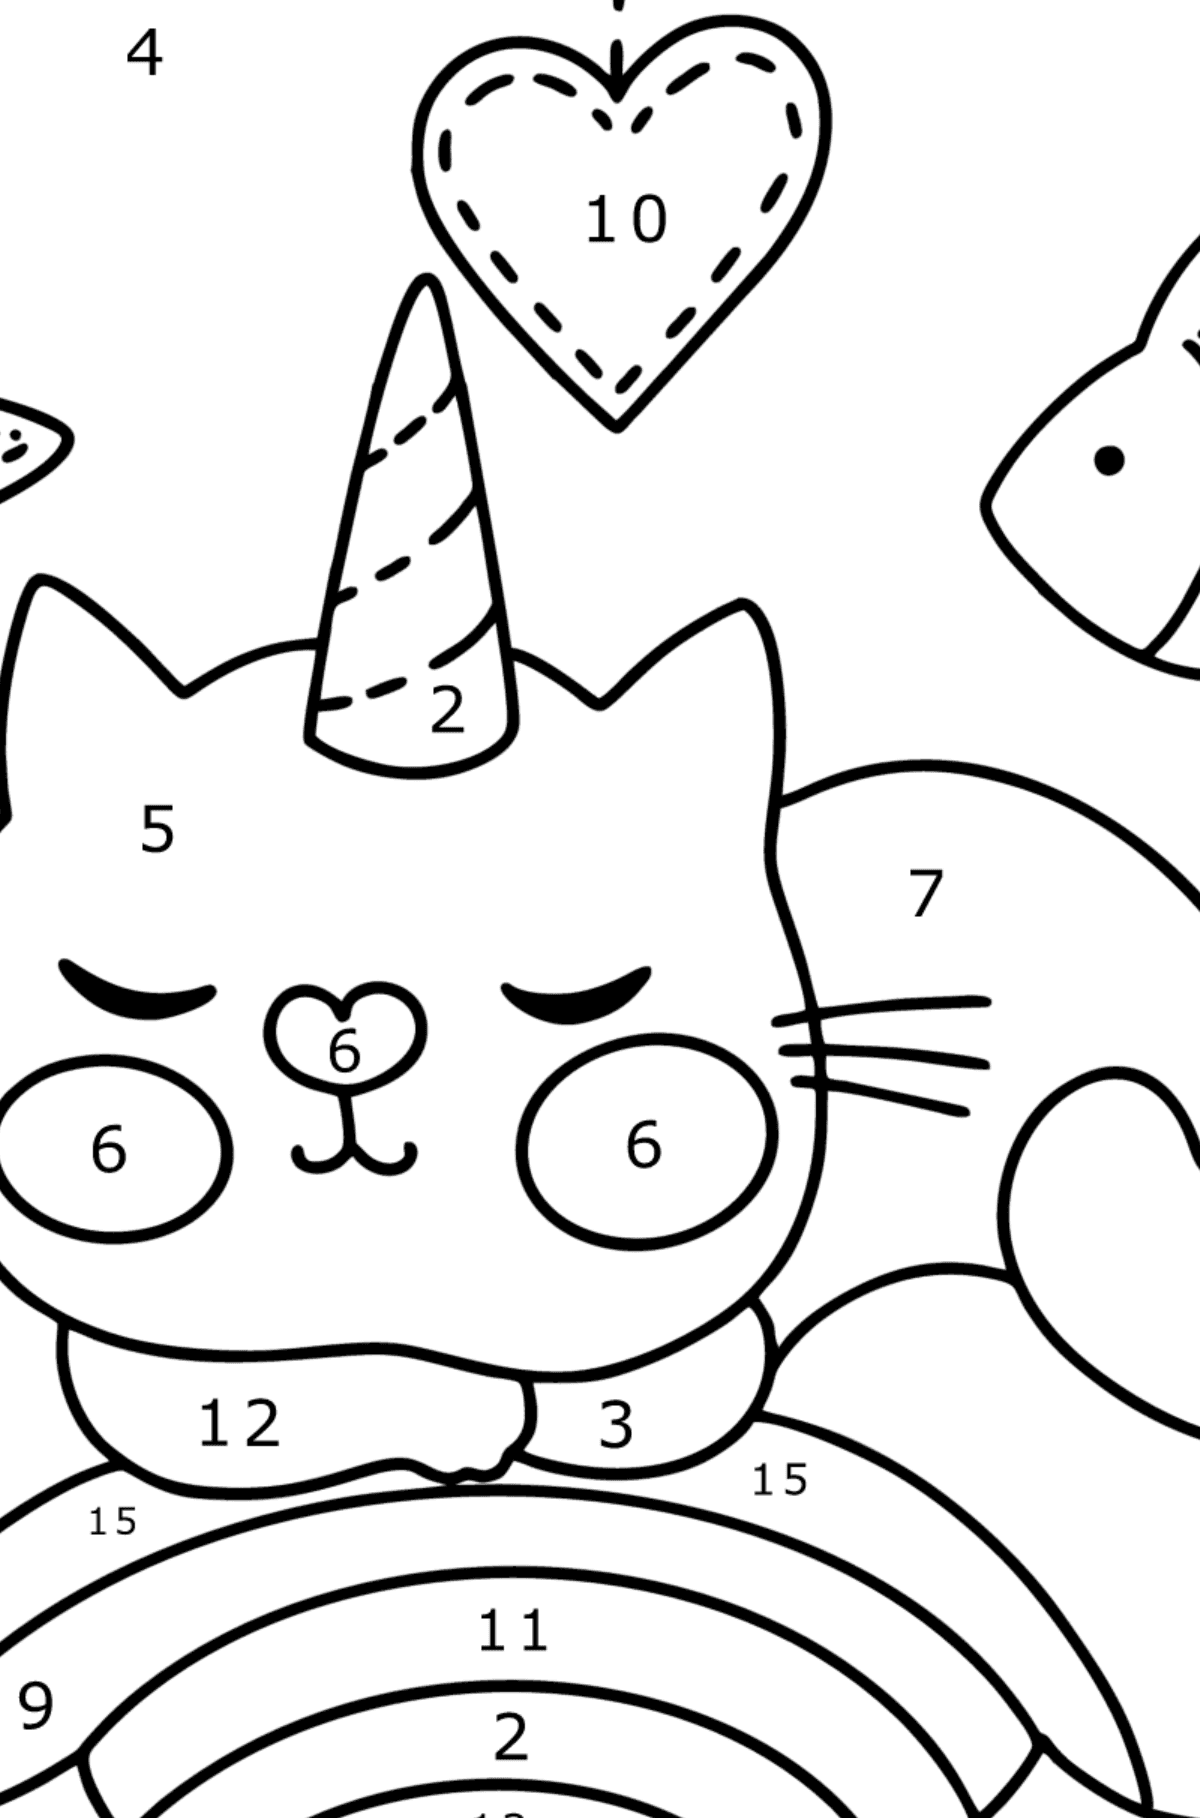 Cute cat unicorn coloring page - Coloring by Numbers for Kids